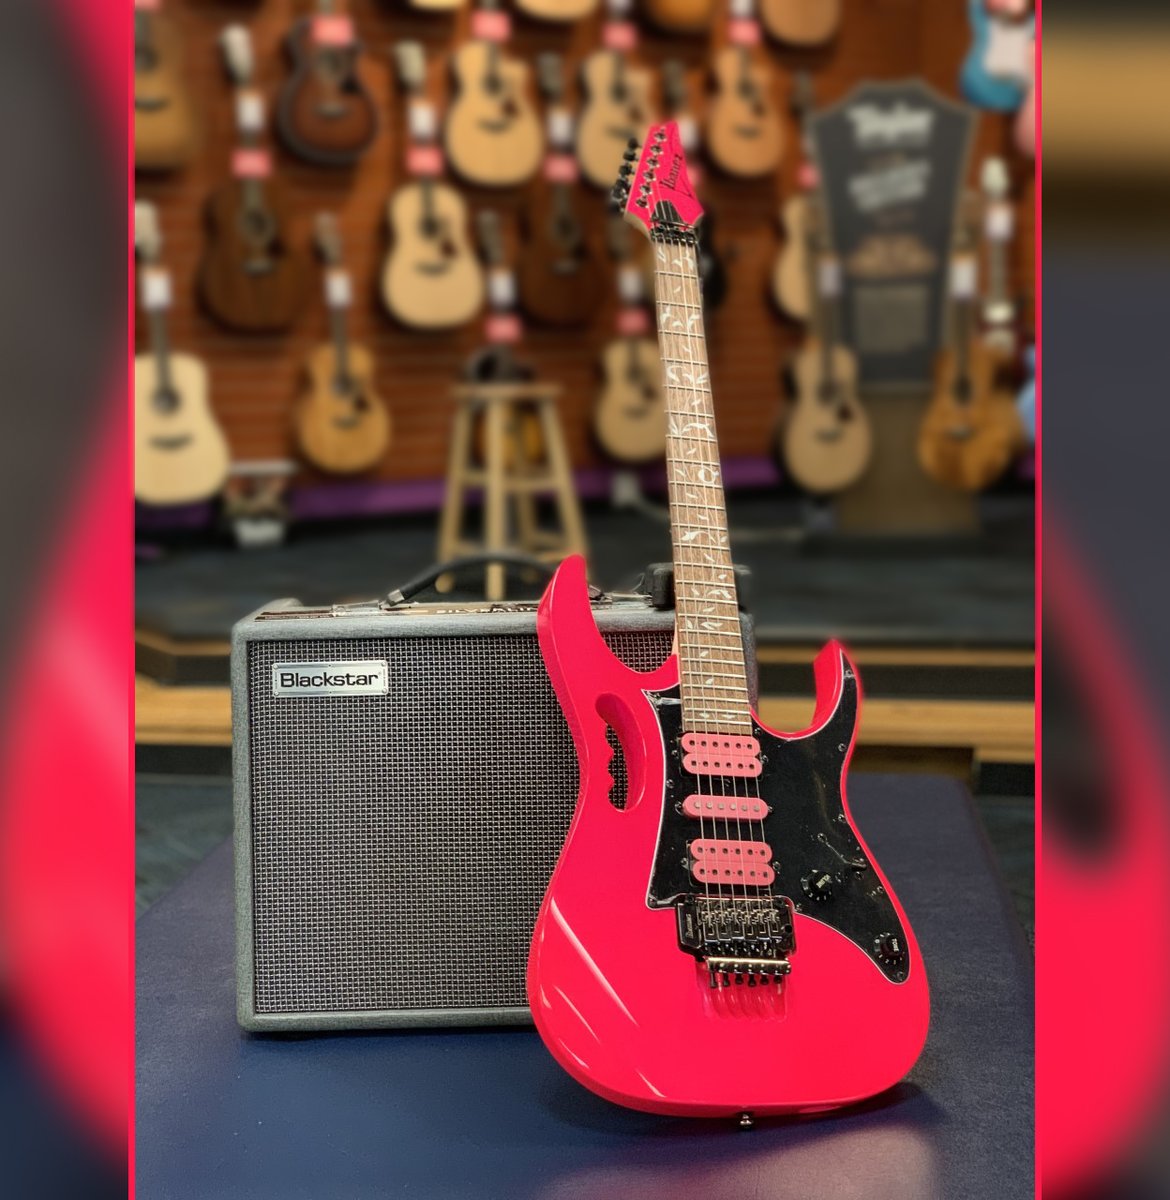 What is your favorite thing about the Ibanez JEMJR?